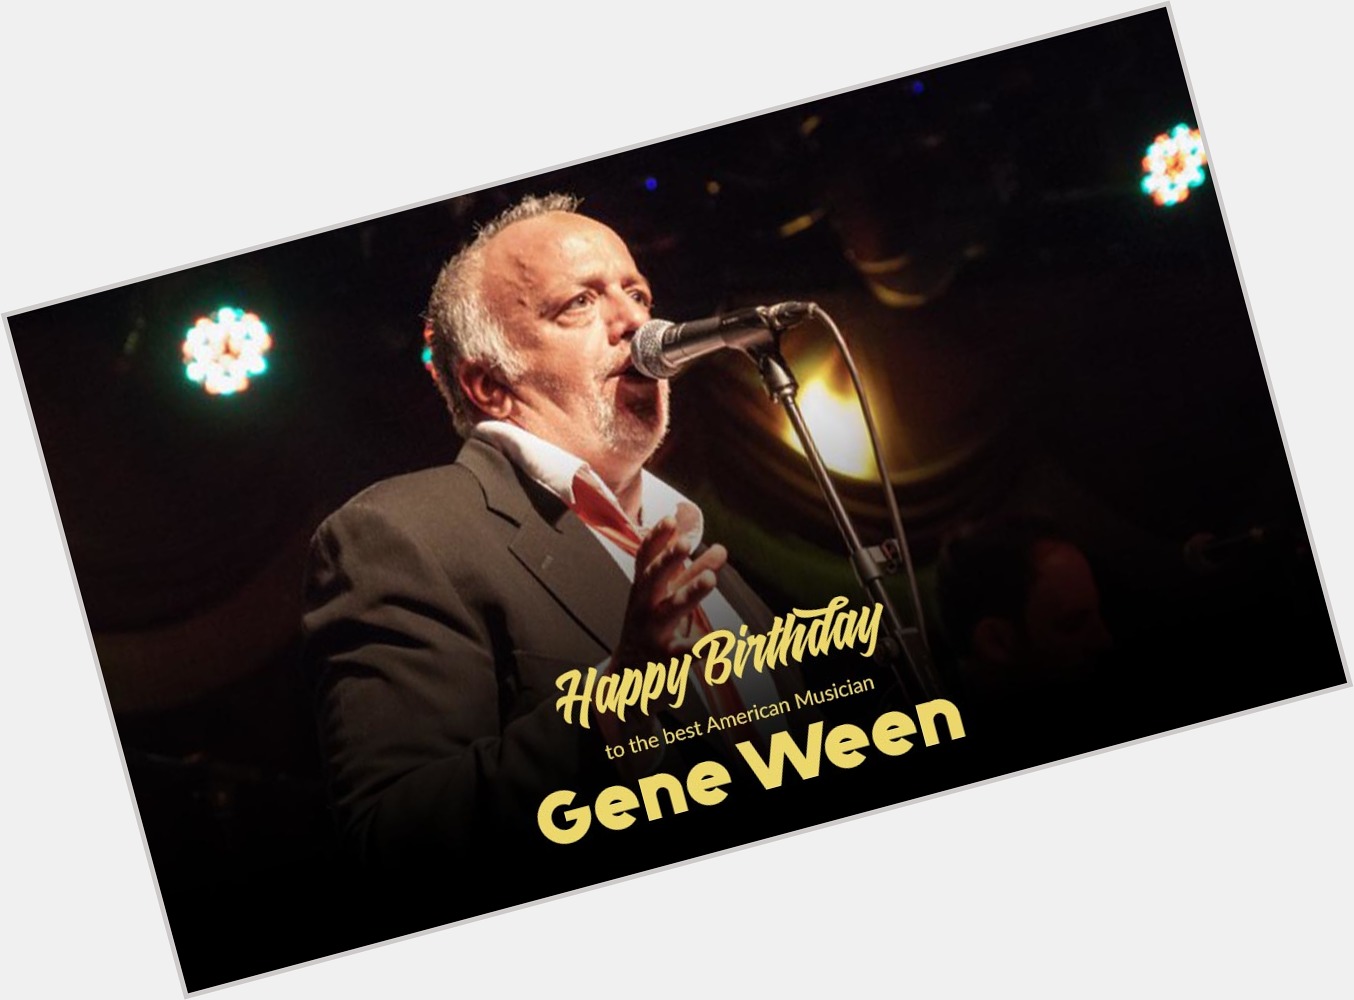 Happy Birthday to the best American Musician Gene Ween, who was born on 17 March 1989. 